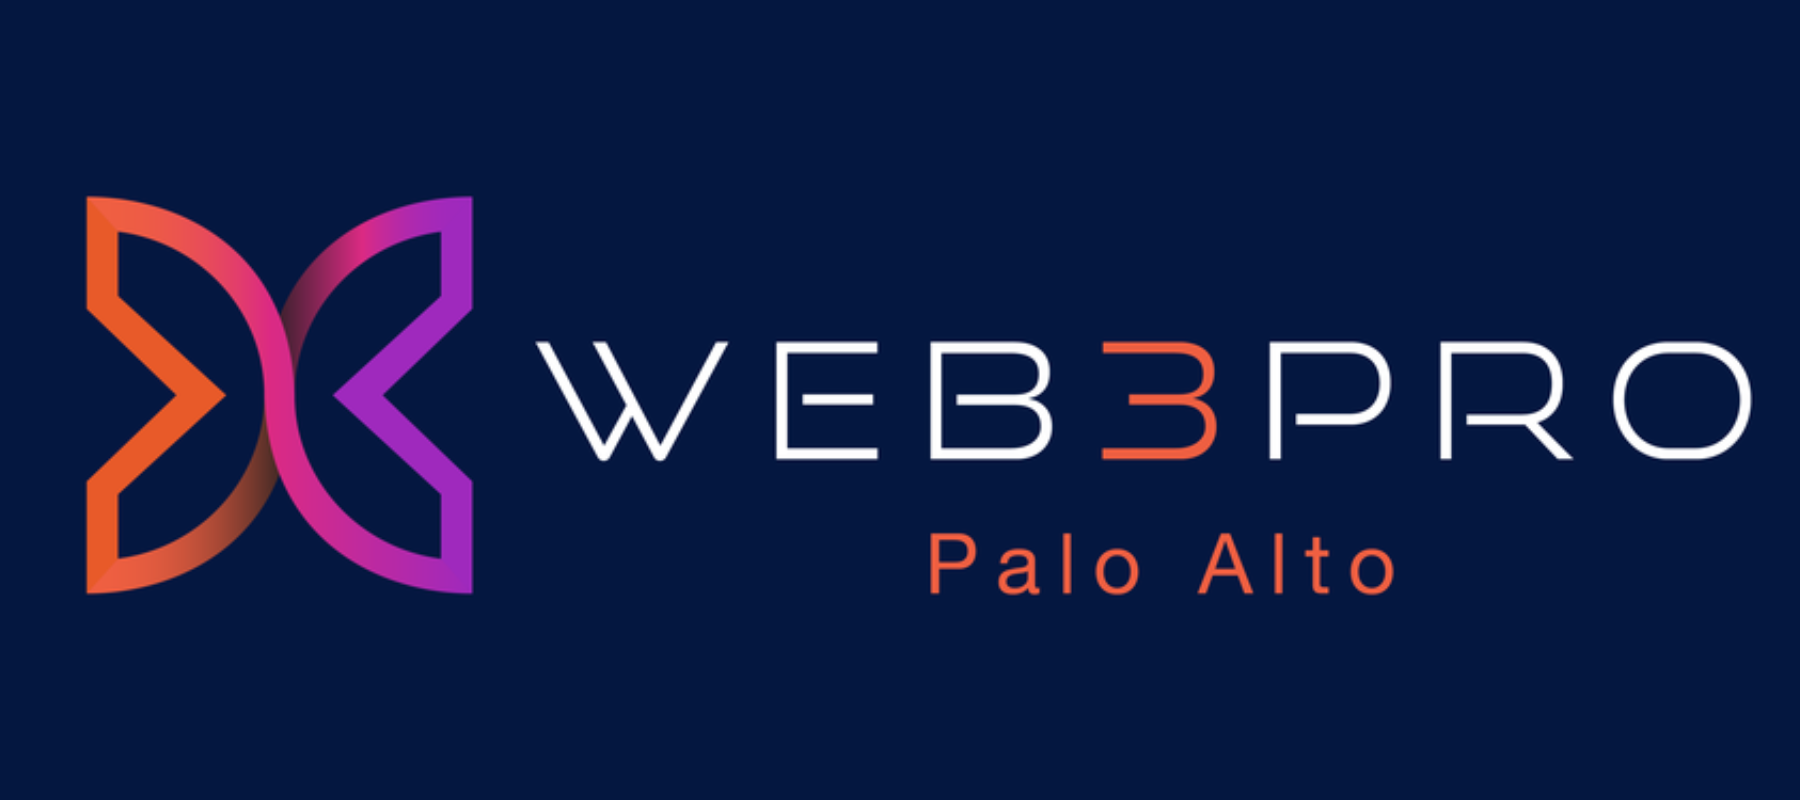 Web3 Pro closes new funding round in further sign of digital ads upheaval